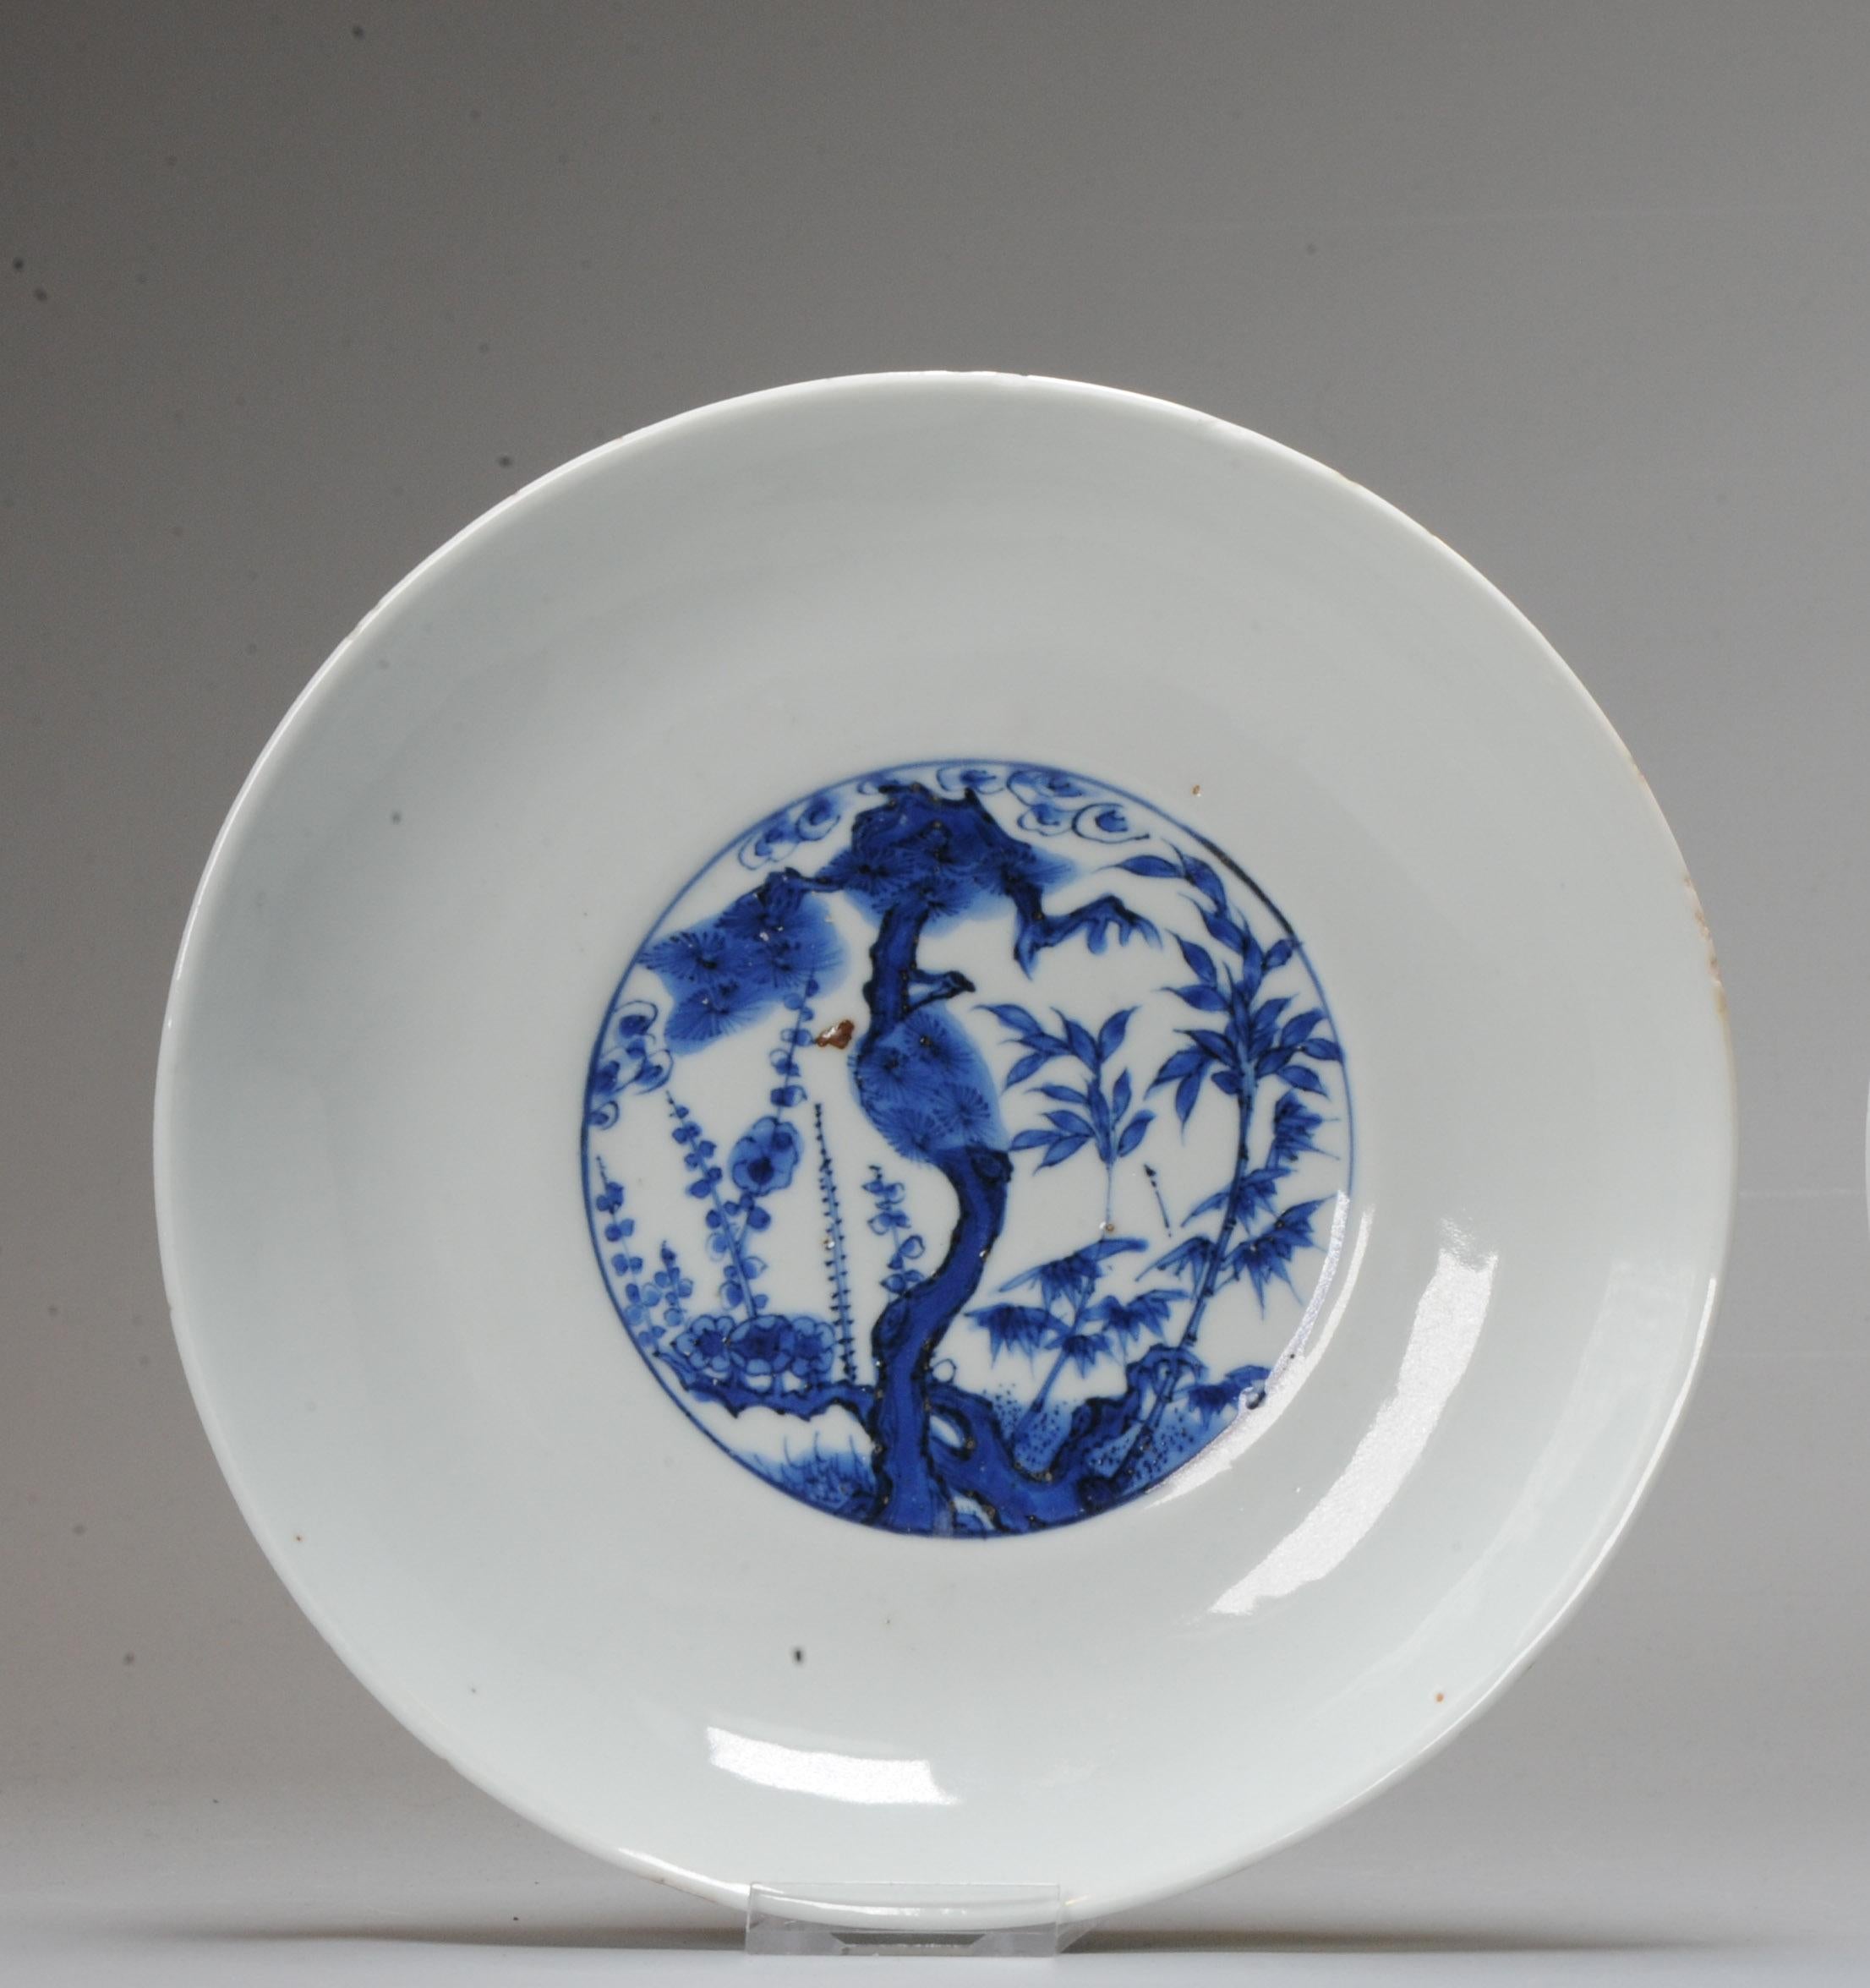 Description
A very nicely decorated plate with a beautiful scene of the Three Friends of Winter.

With a nice empty rim.

Wanli, Tianqi or Chongzhen Period 1590 – 1640

Condition
Minimal rimfrits only. Size 212x43mm